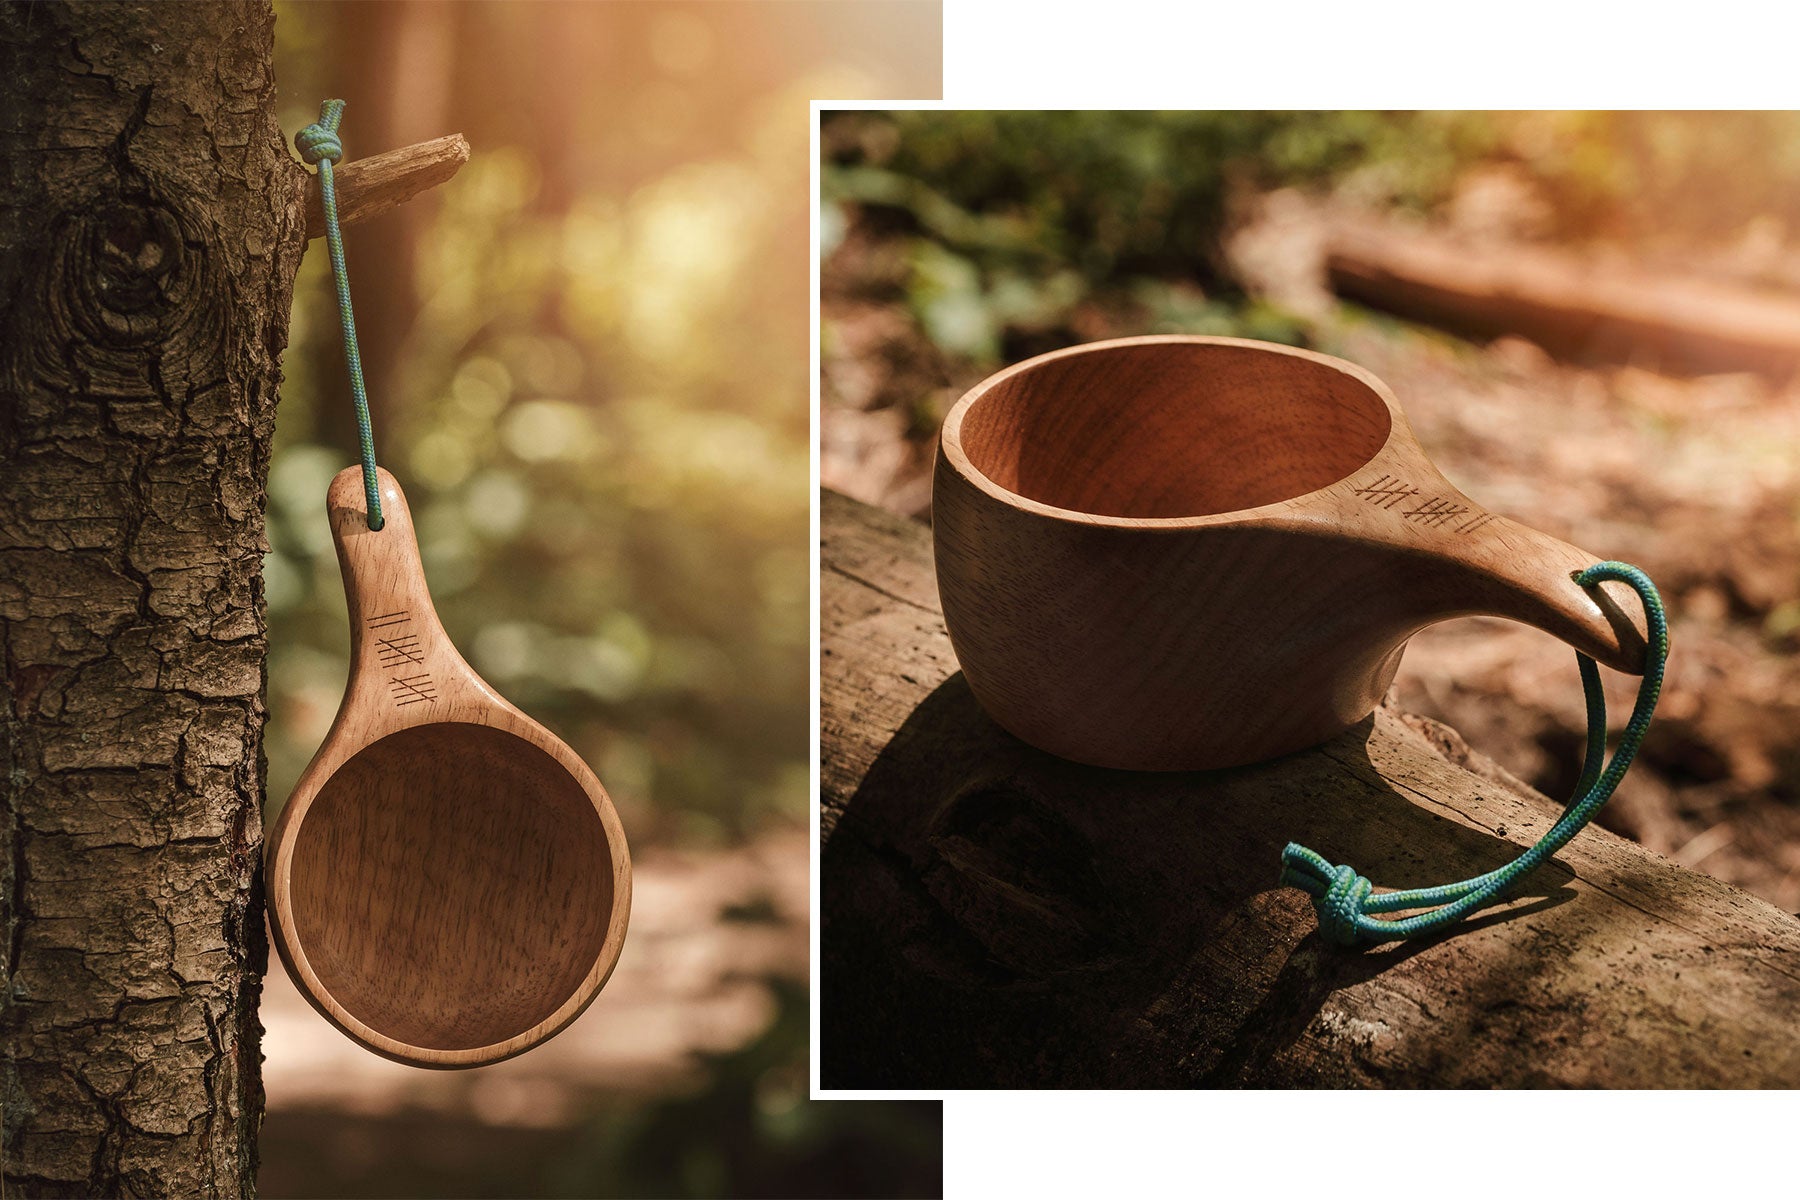 Kuksa Cup, What is a Kuksa Cup?